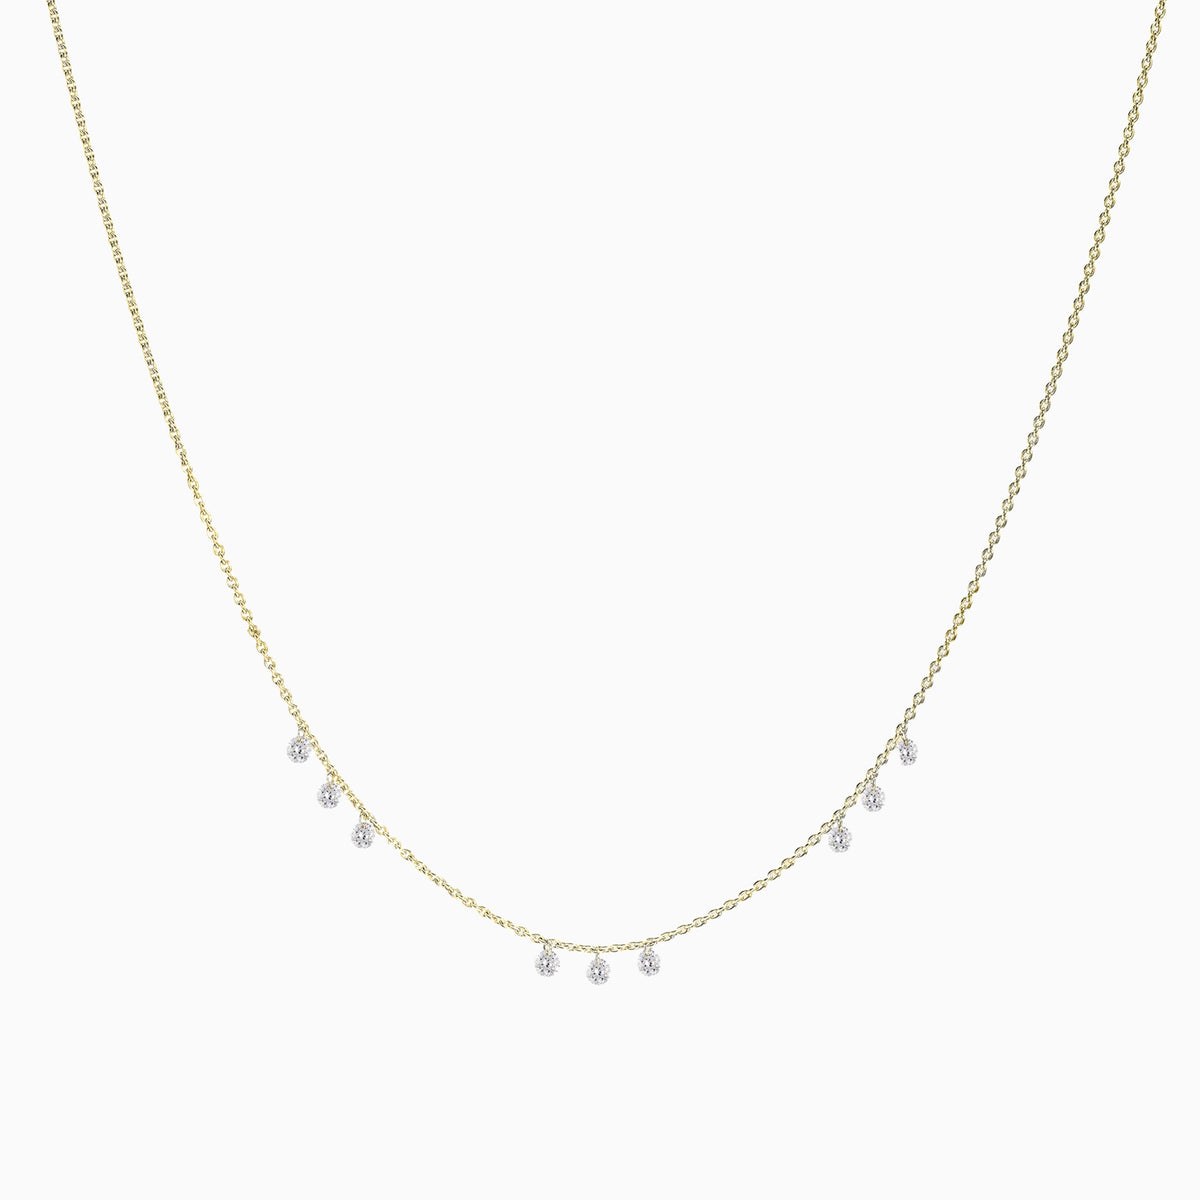 Floating Nine Diamonds Necklace in Yellow Gold